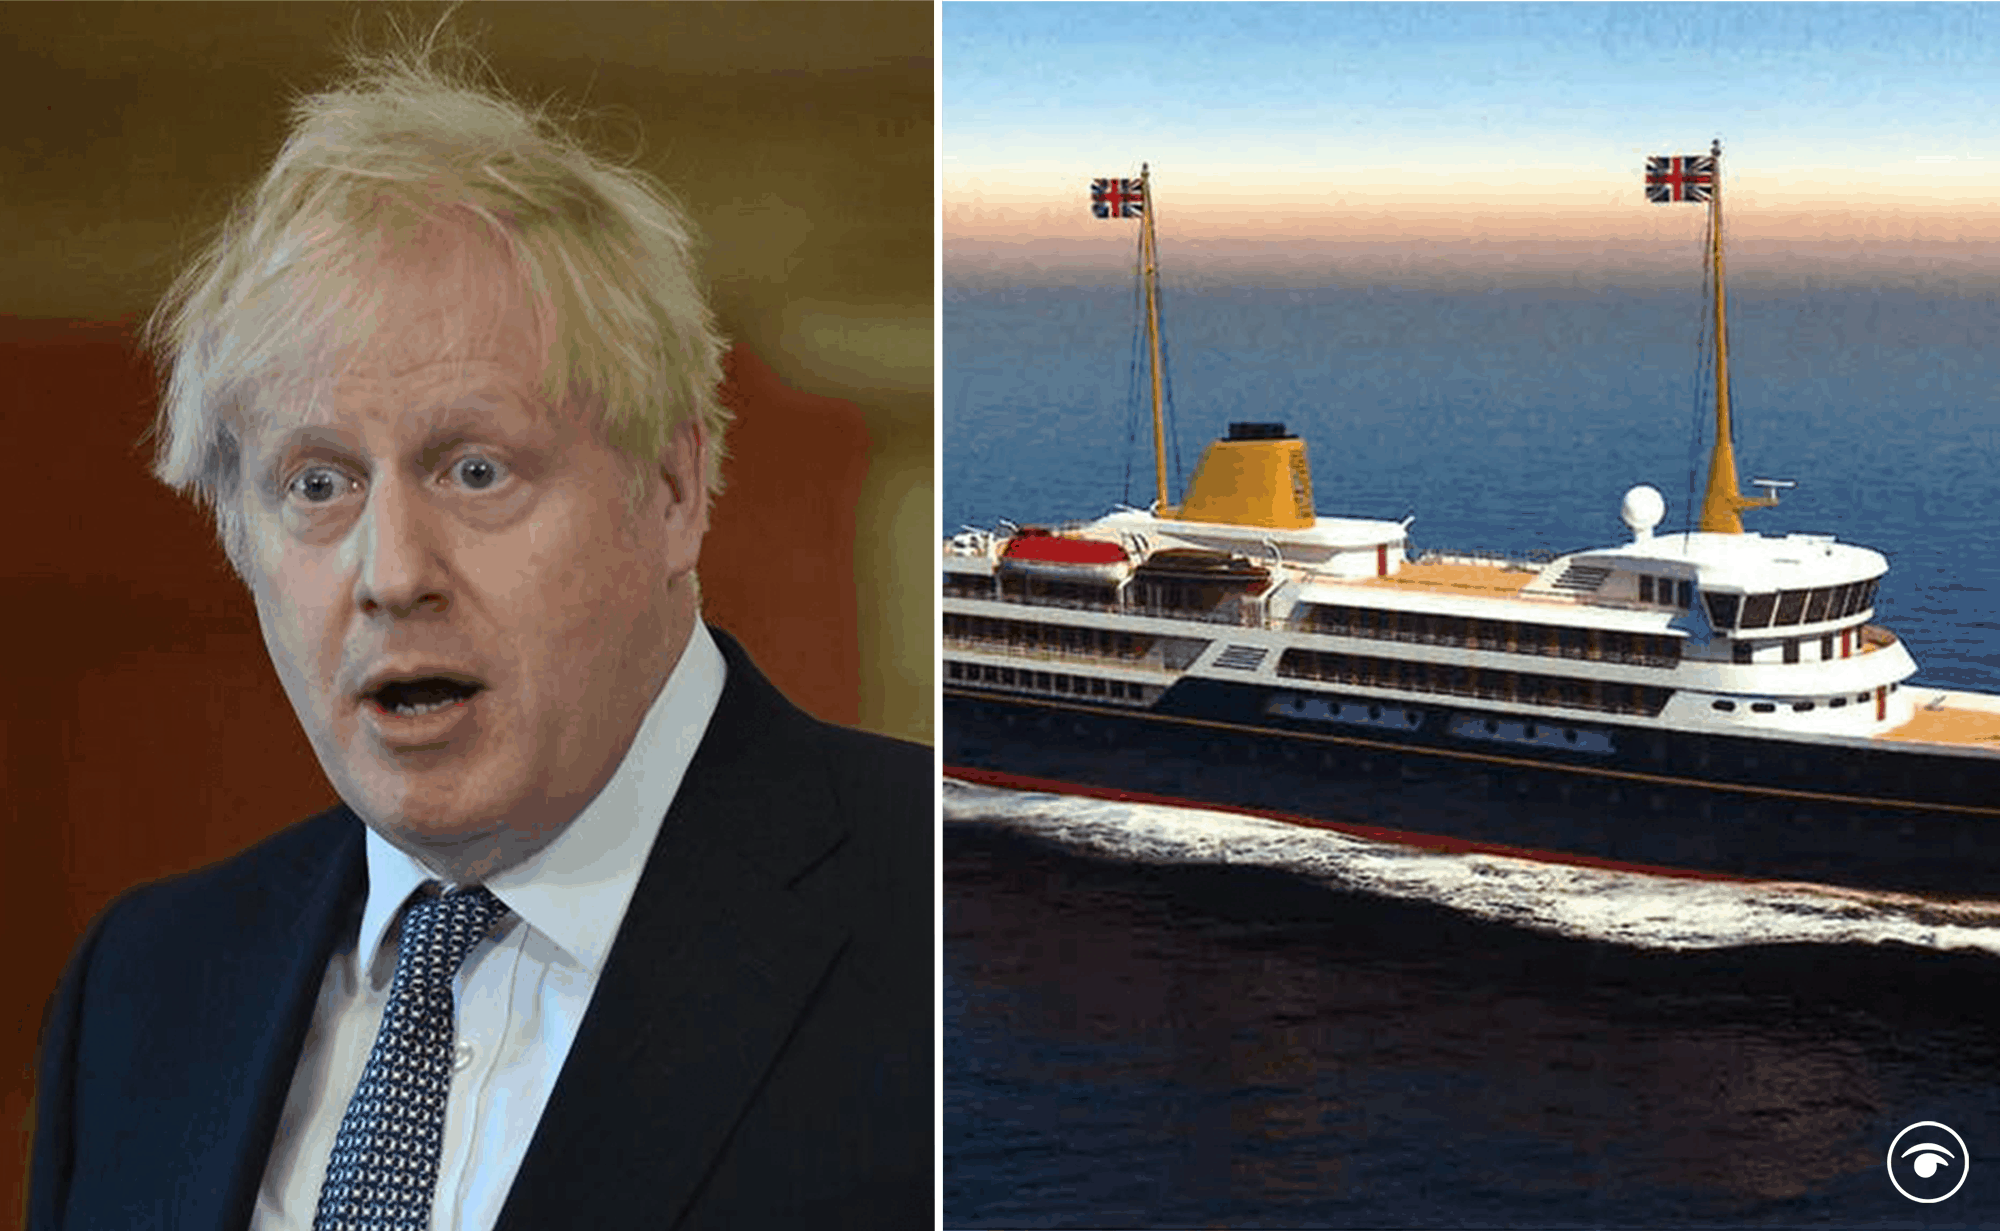 Johnson’s new royal yacht ‘looks like fishing trawler from the 50s’, says top naval designer